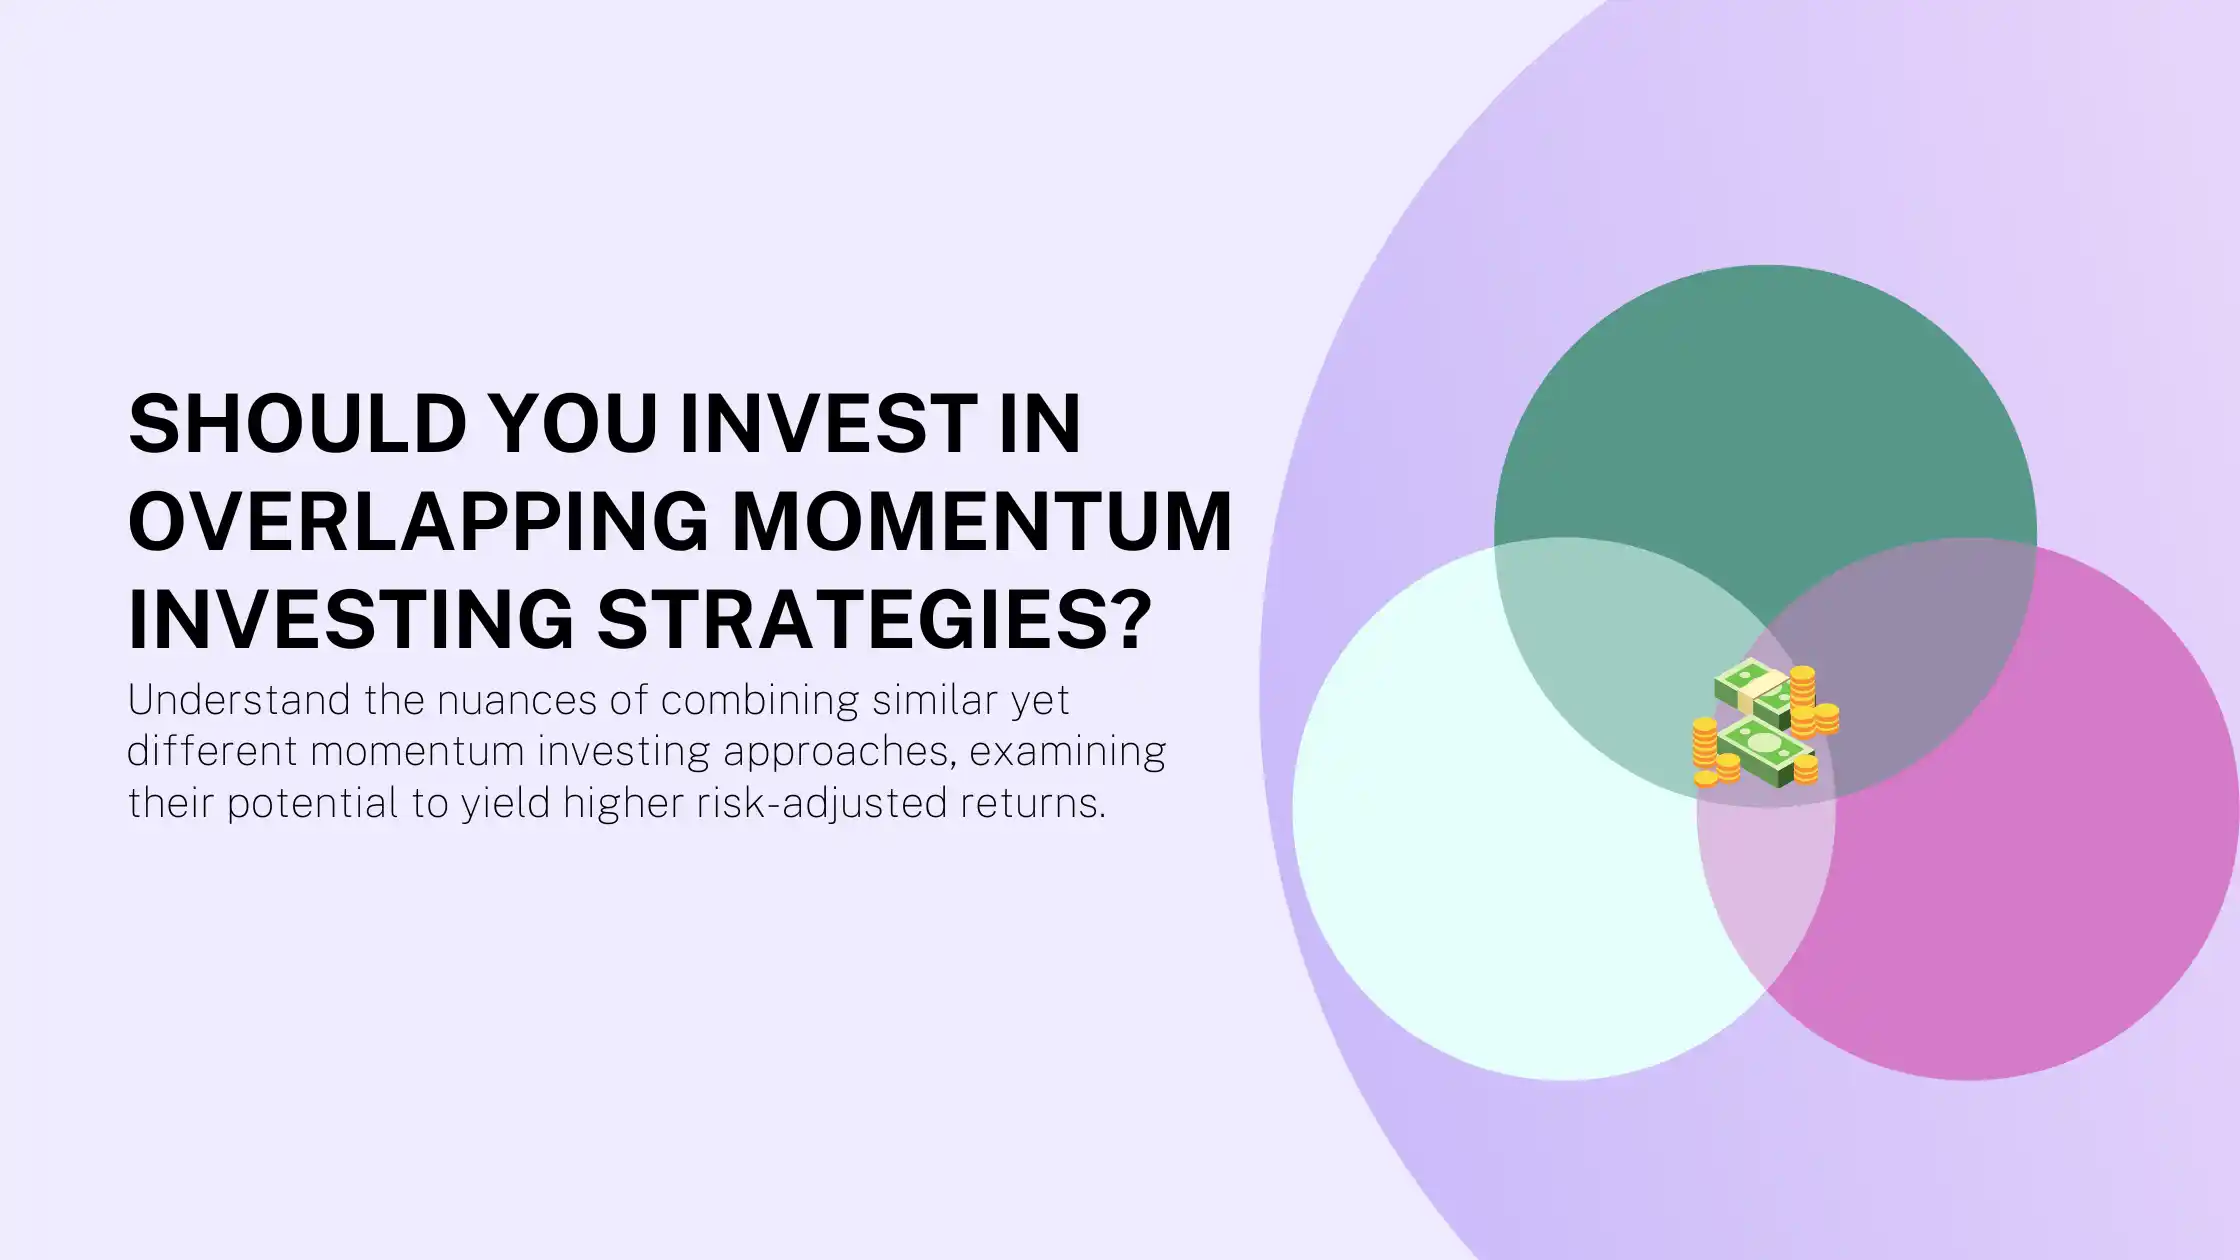 Should you invest in overlapping momentum investing strategies?